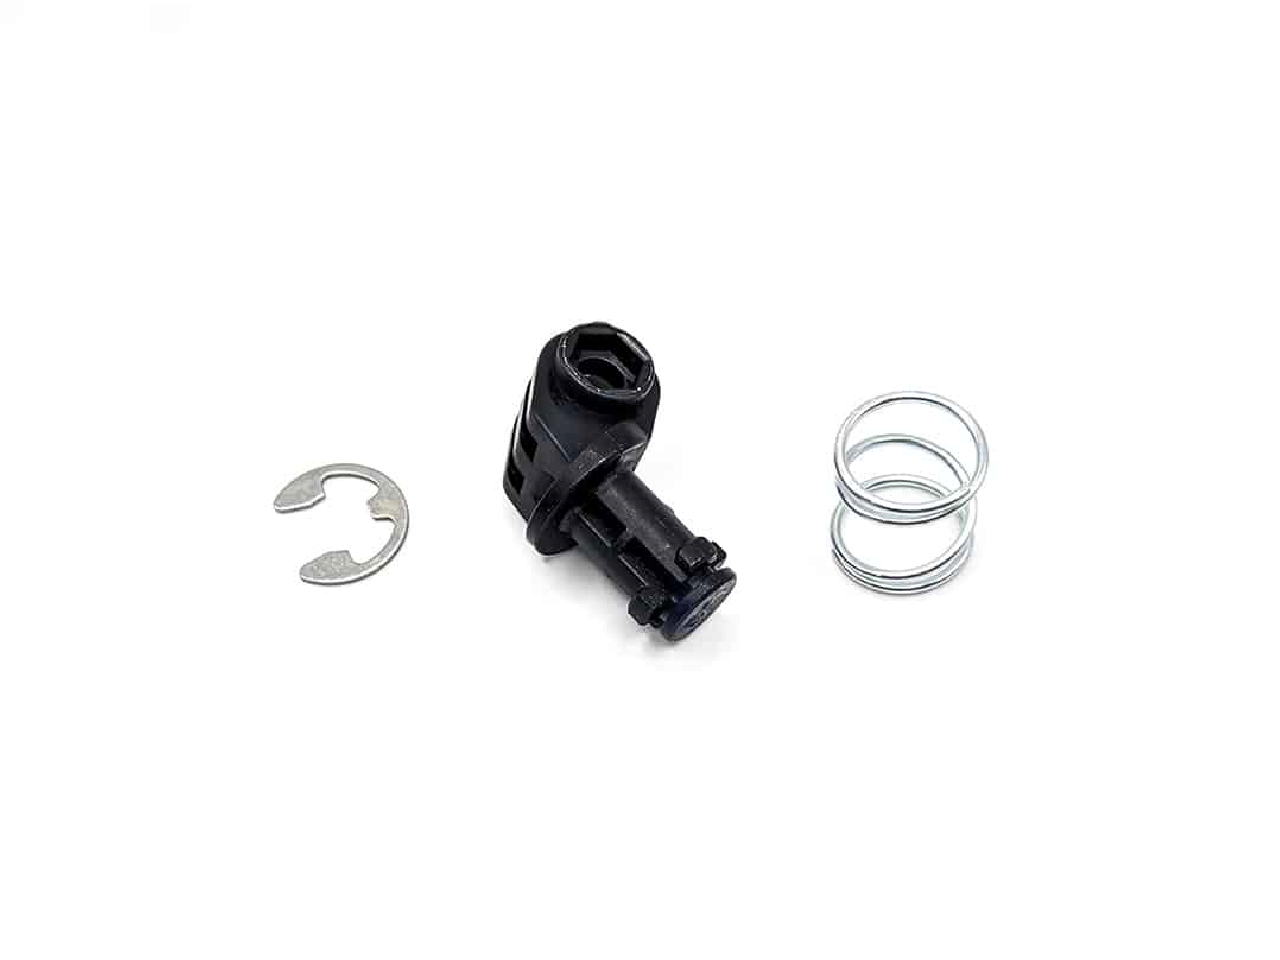 Spare parts for Helmet Motorcycle Gripper Post Kit